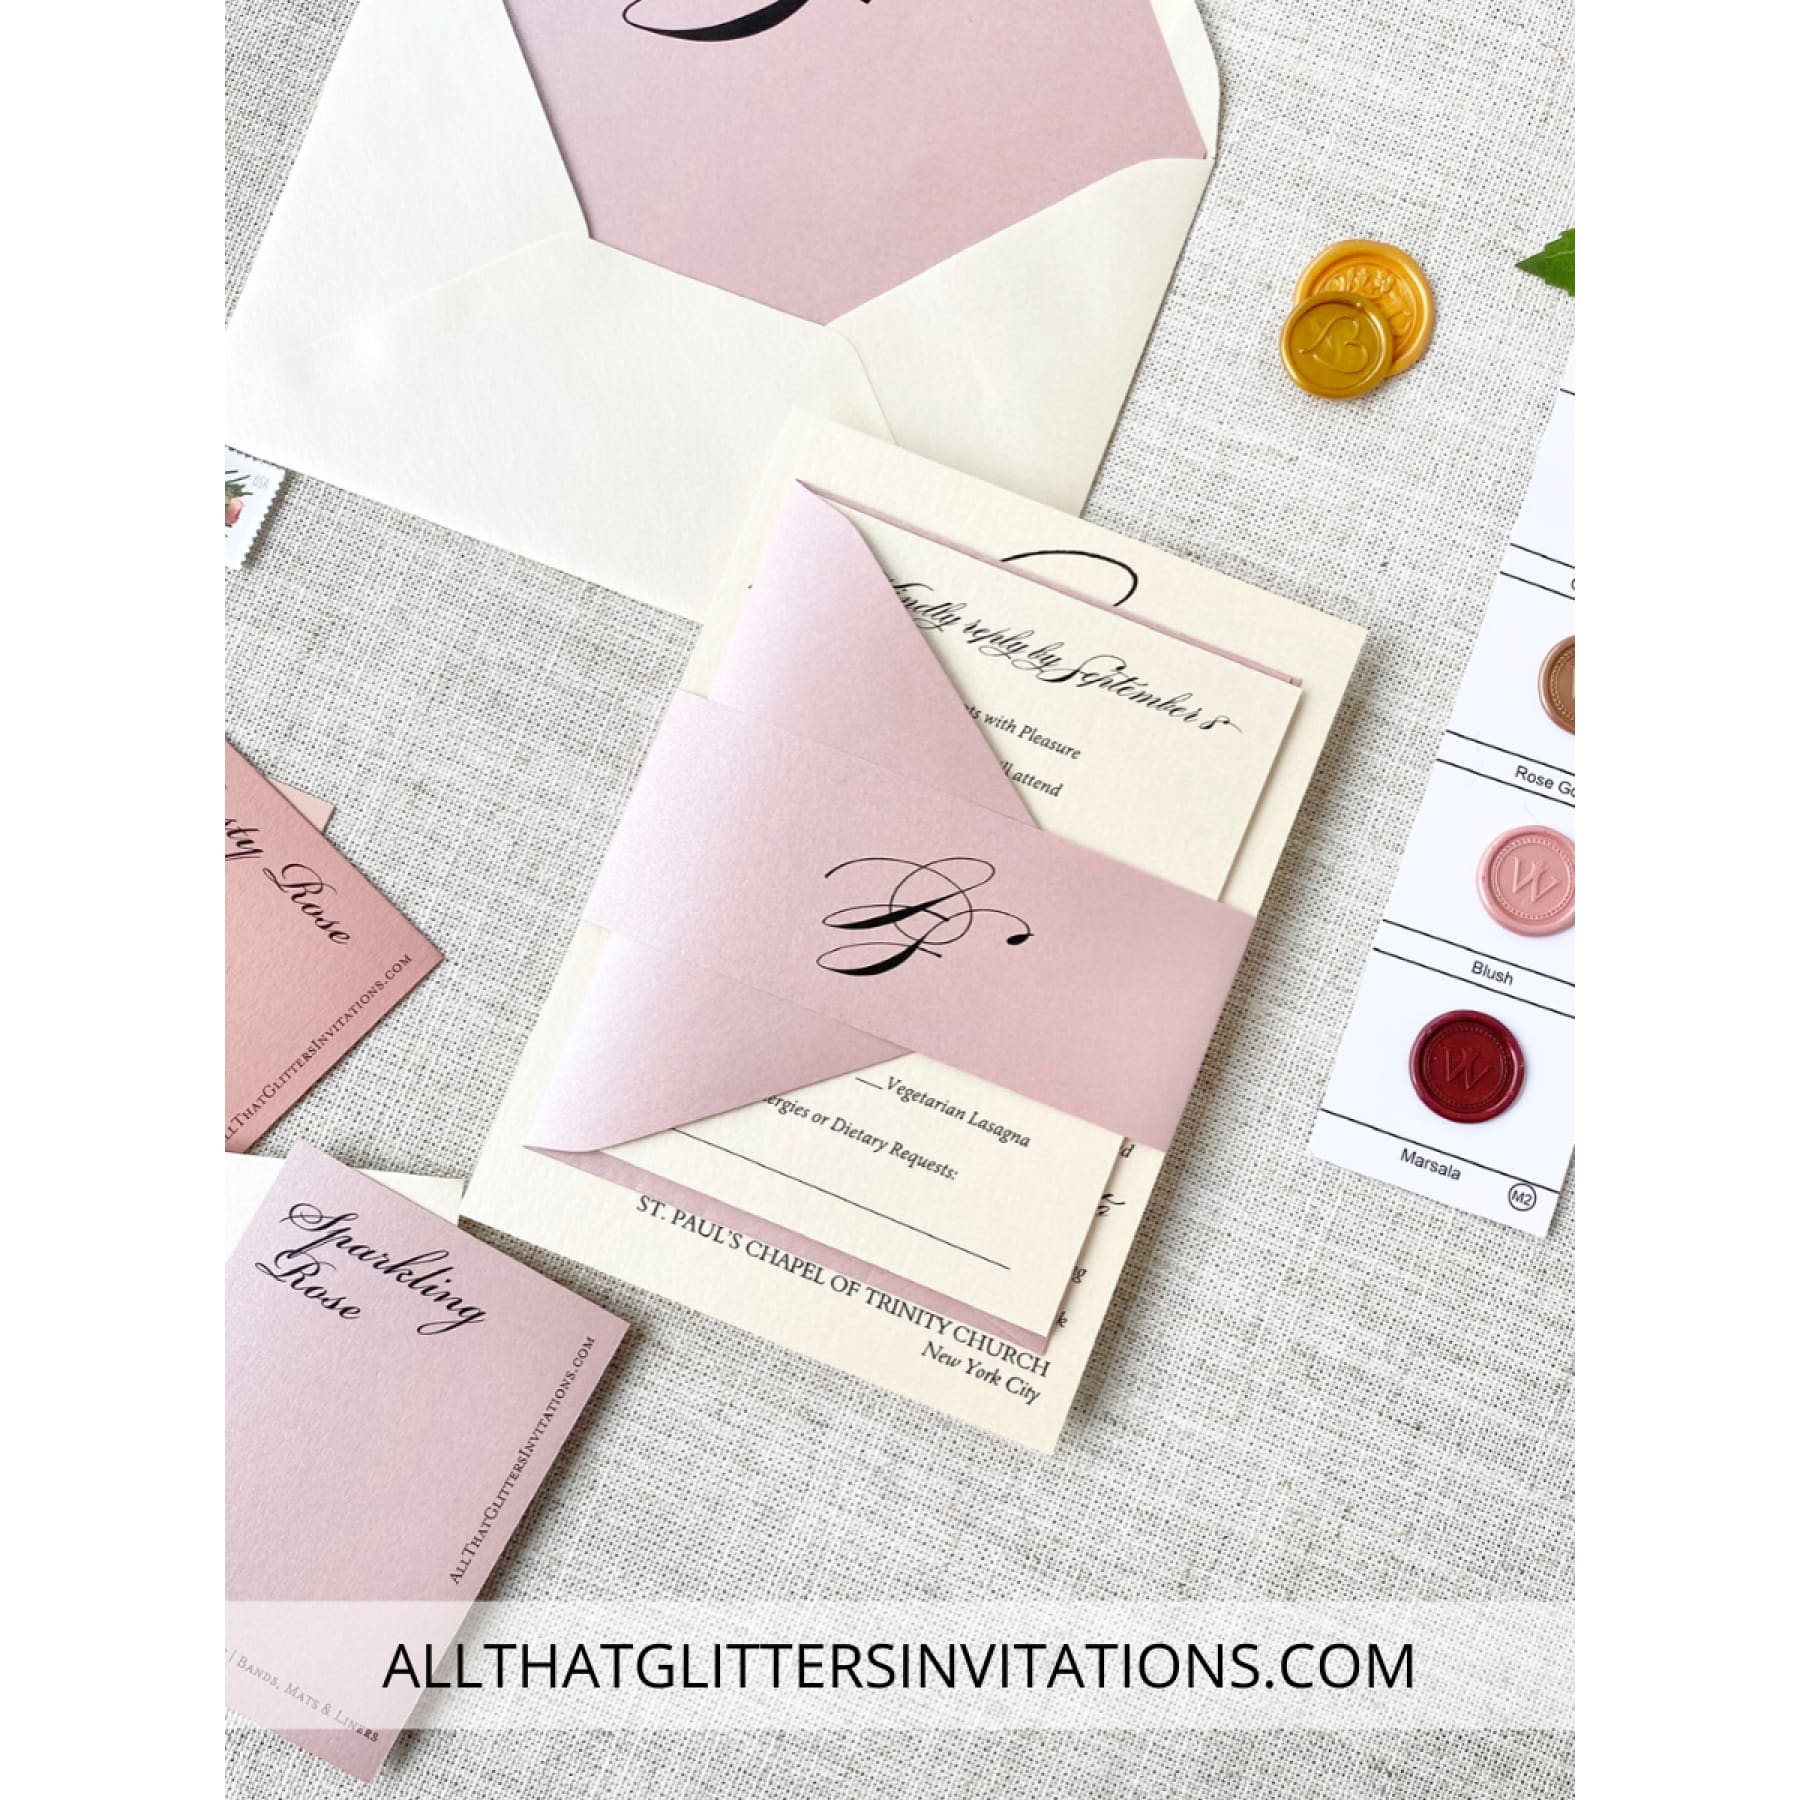 Multi-color wedding invitations with initial monogram - All That Glitters Invitations